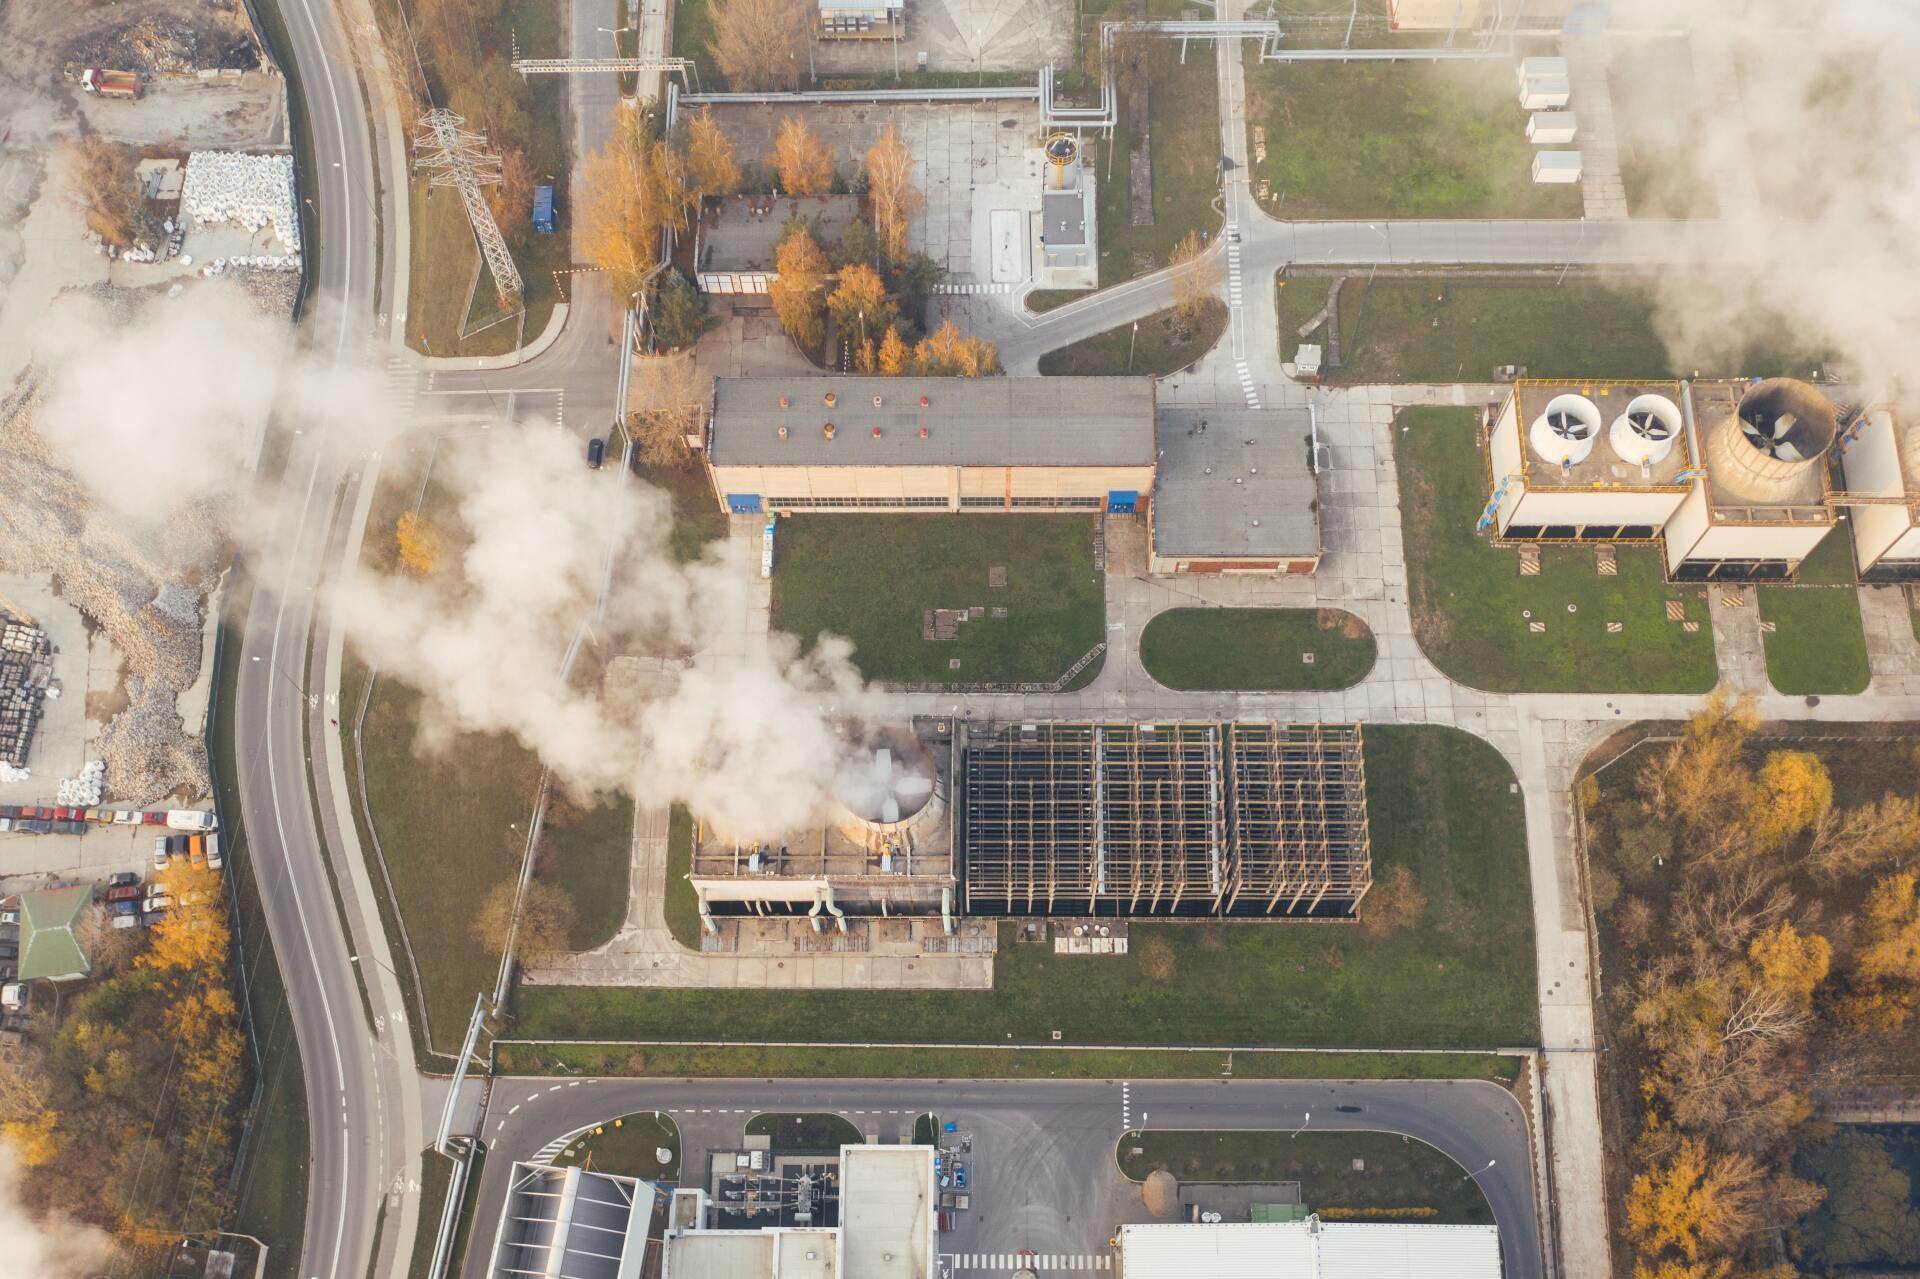 overhead view of industrial business's